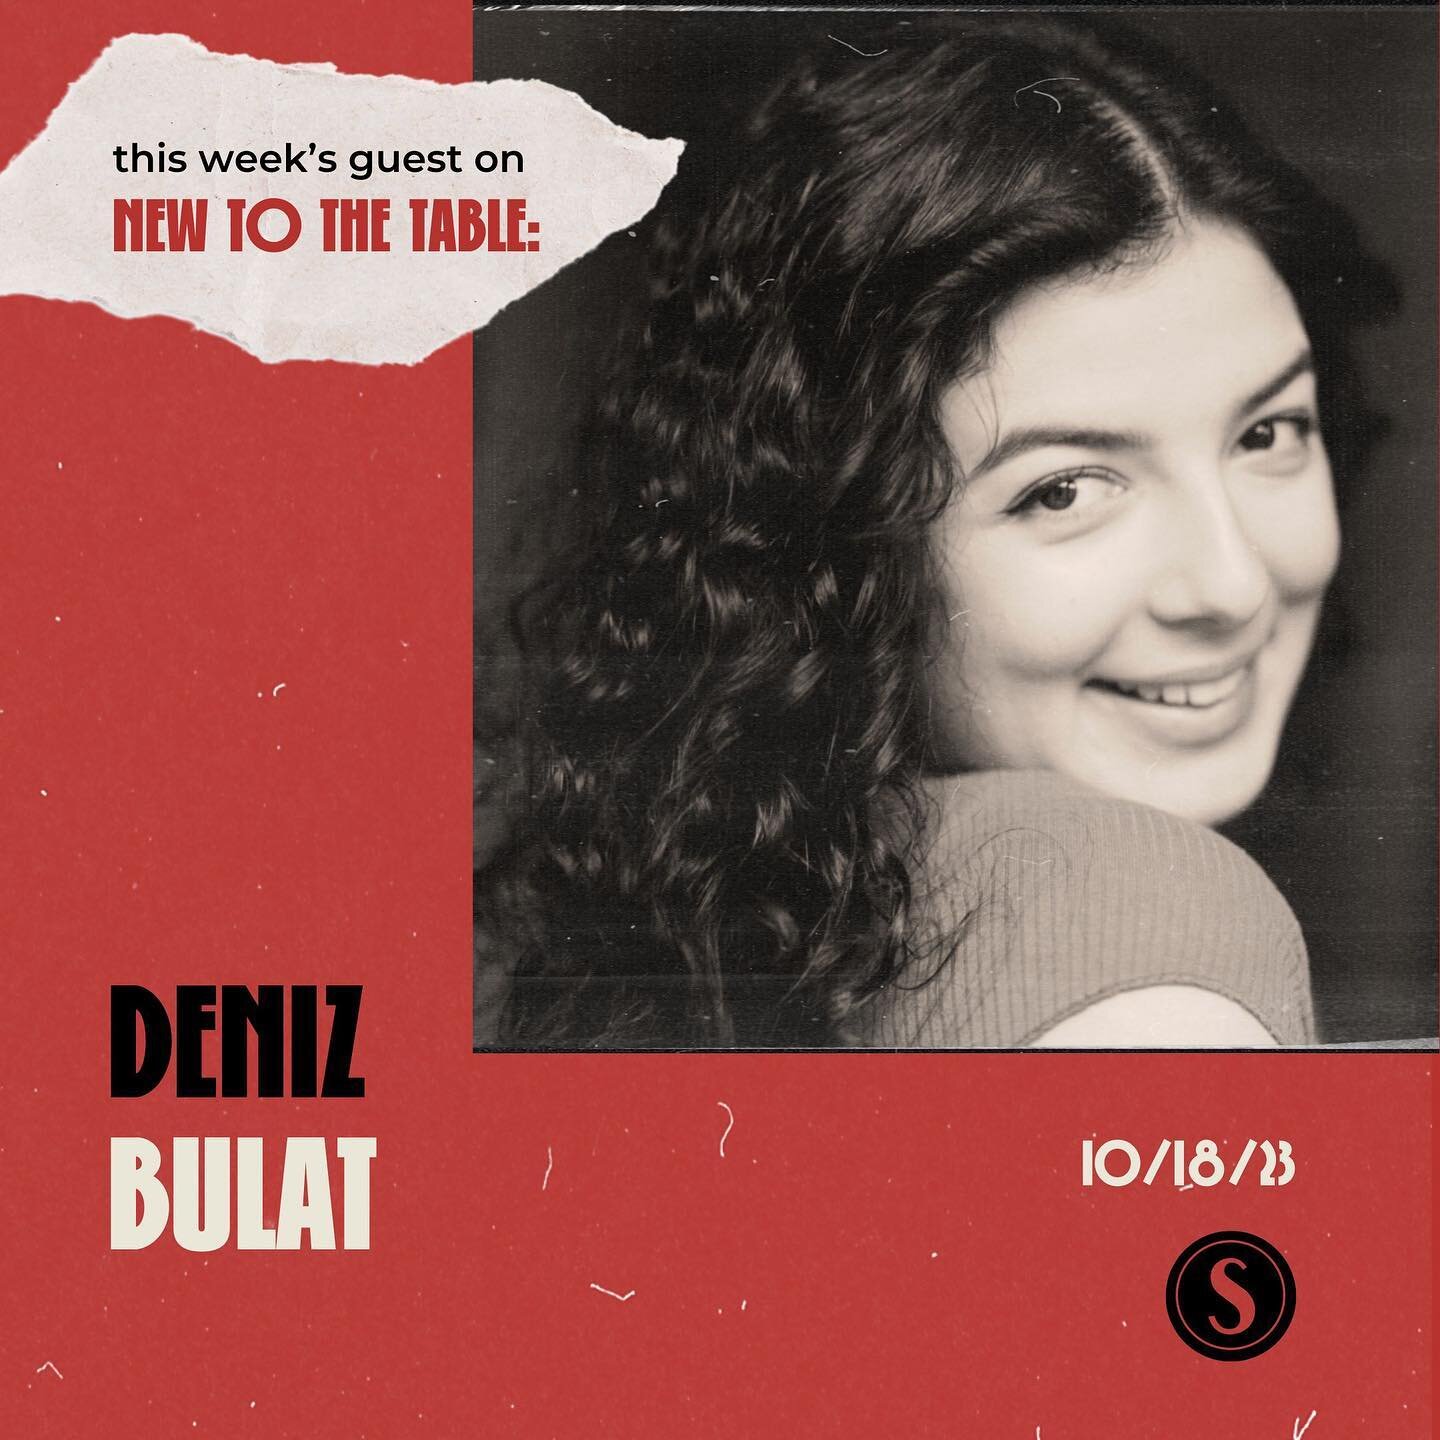 we&rsquo;ve got DENIZ BULAT on New To The Table 🎙️✨

Deniz Bulat is a multi-hyphenate creative who primarily identifies as an actor and has worked in too many production roles to count on one hand. The queen of never waiting for permission &amp; get